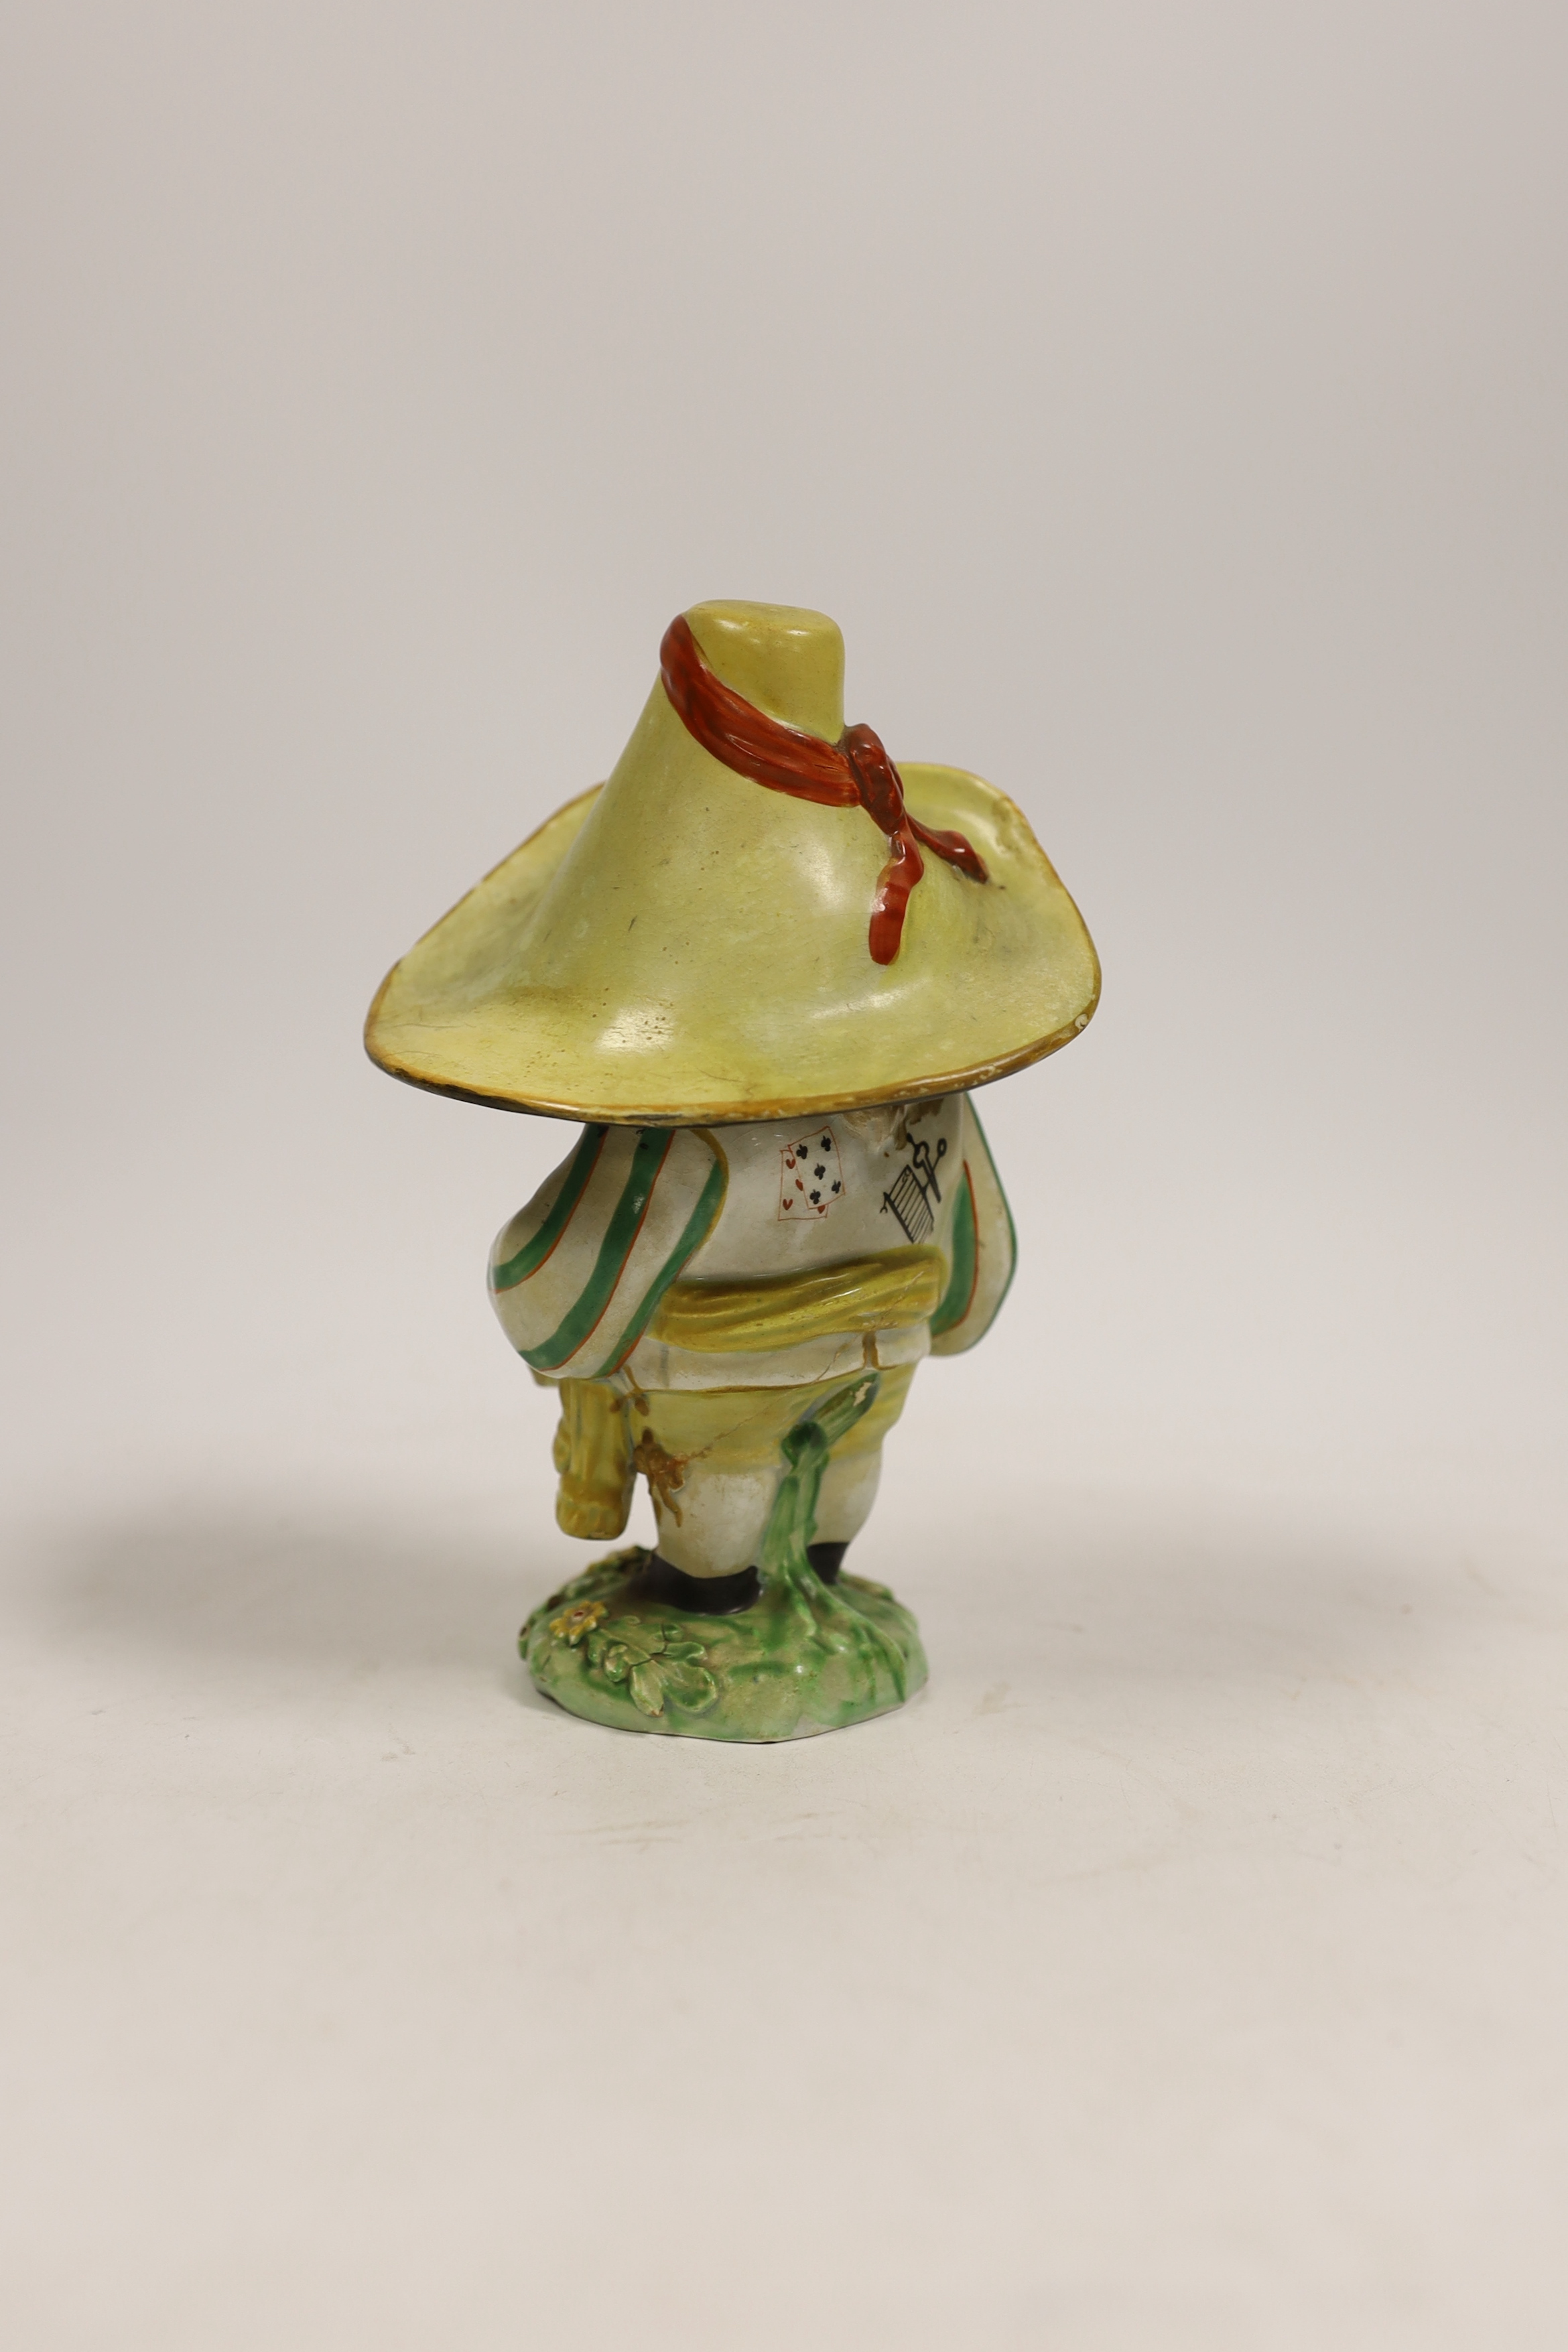 A Staffordshire pearlware Mansion House dwarf, c.1820, 15.5cm - Image 2 of 3